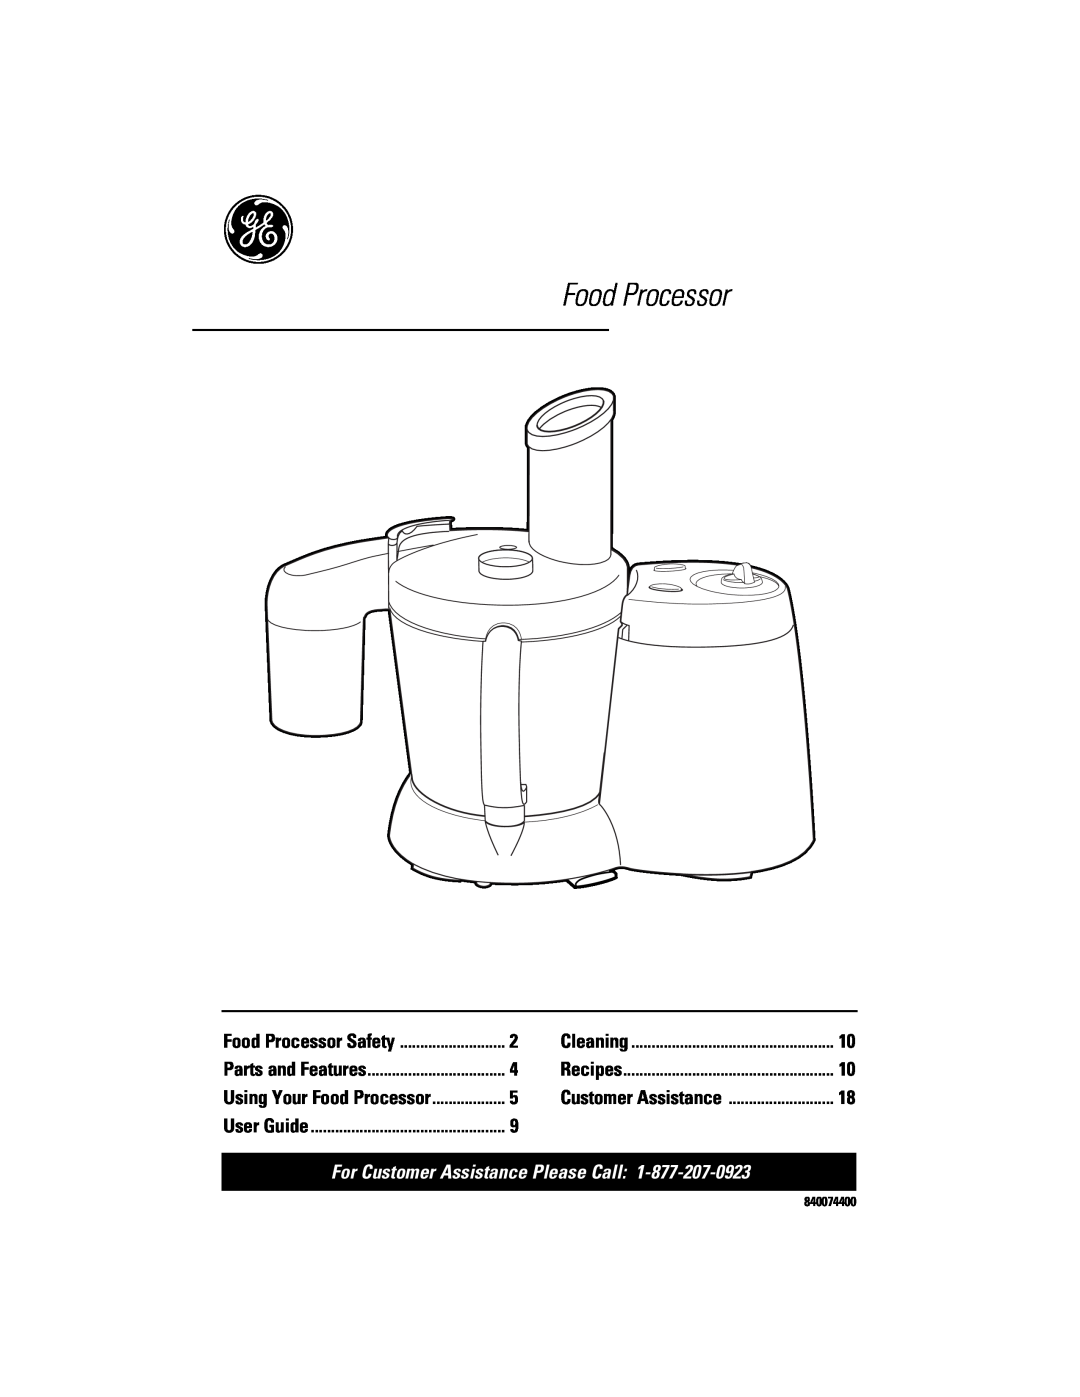 GE 840074400 manual For Customer Assistance Please Call, Food Processor Safety, Cleaning, Parts and Features, Recipes 